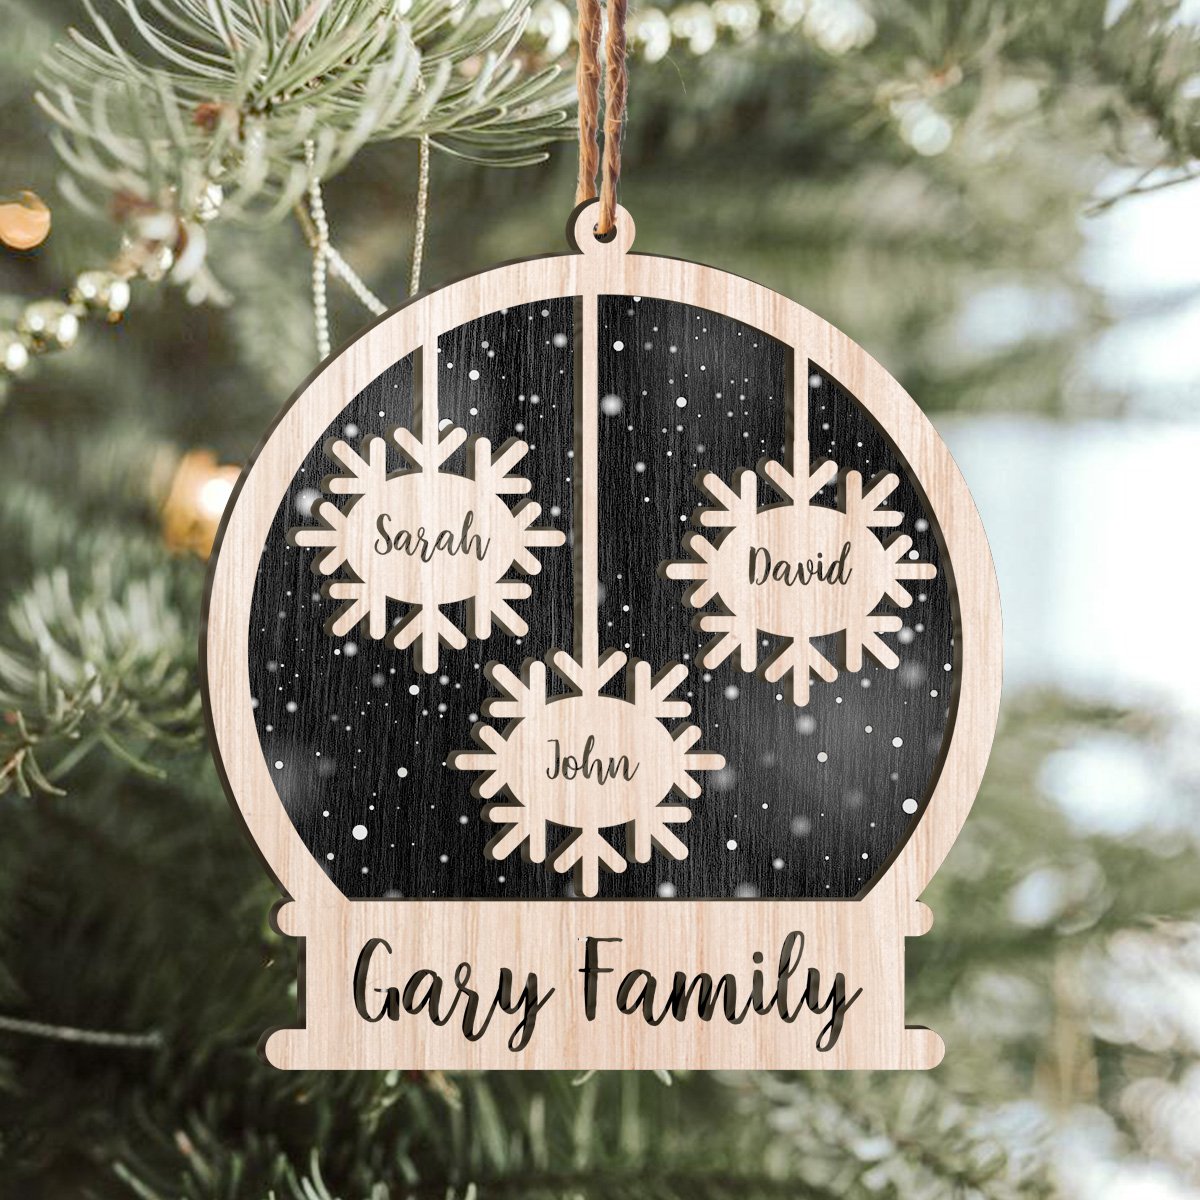 Snow Family Custom Member Names Personalizedwitch Personalized Layered Wood Christmas Ornament